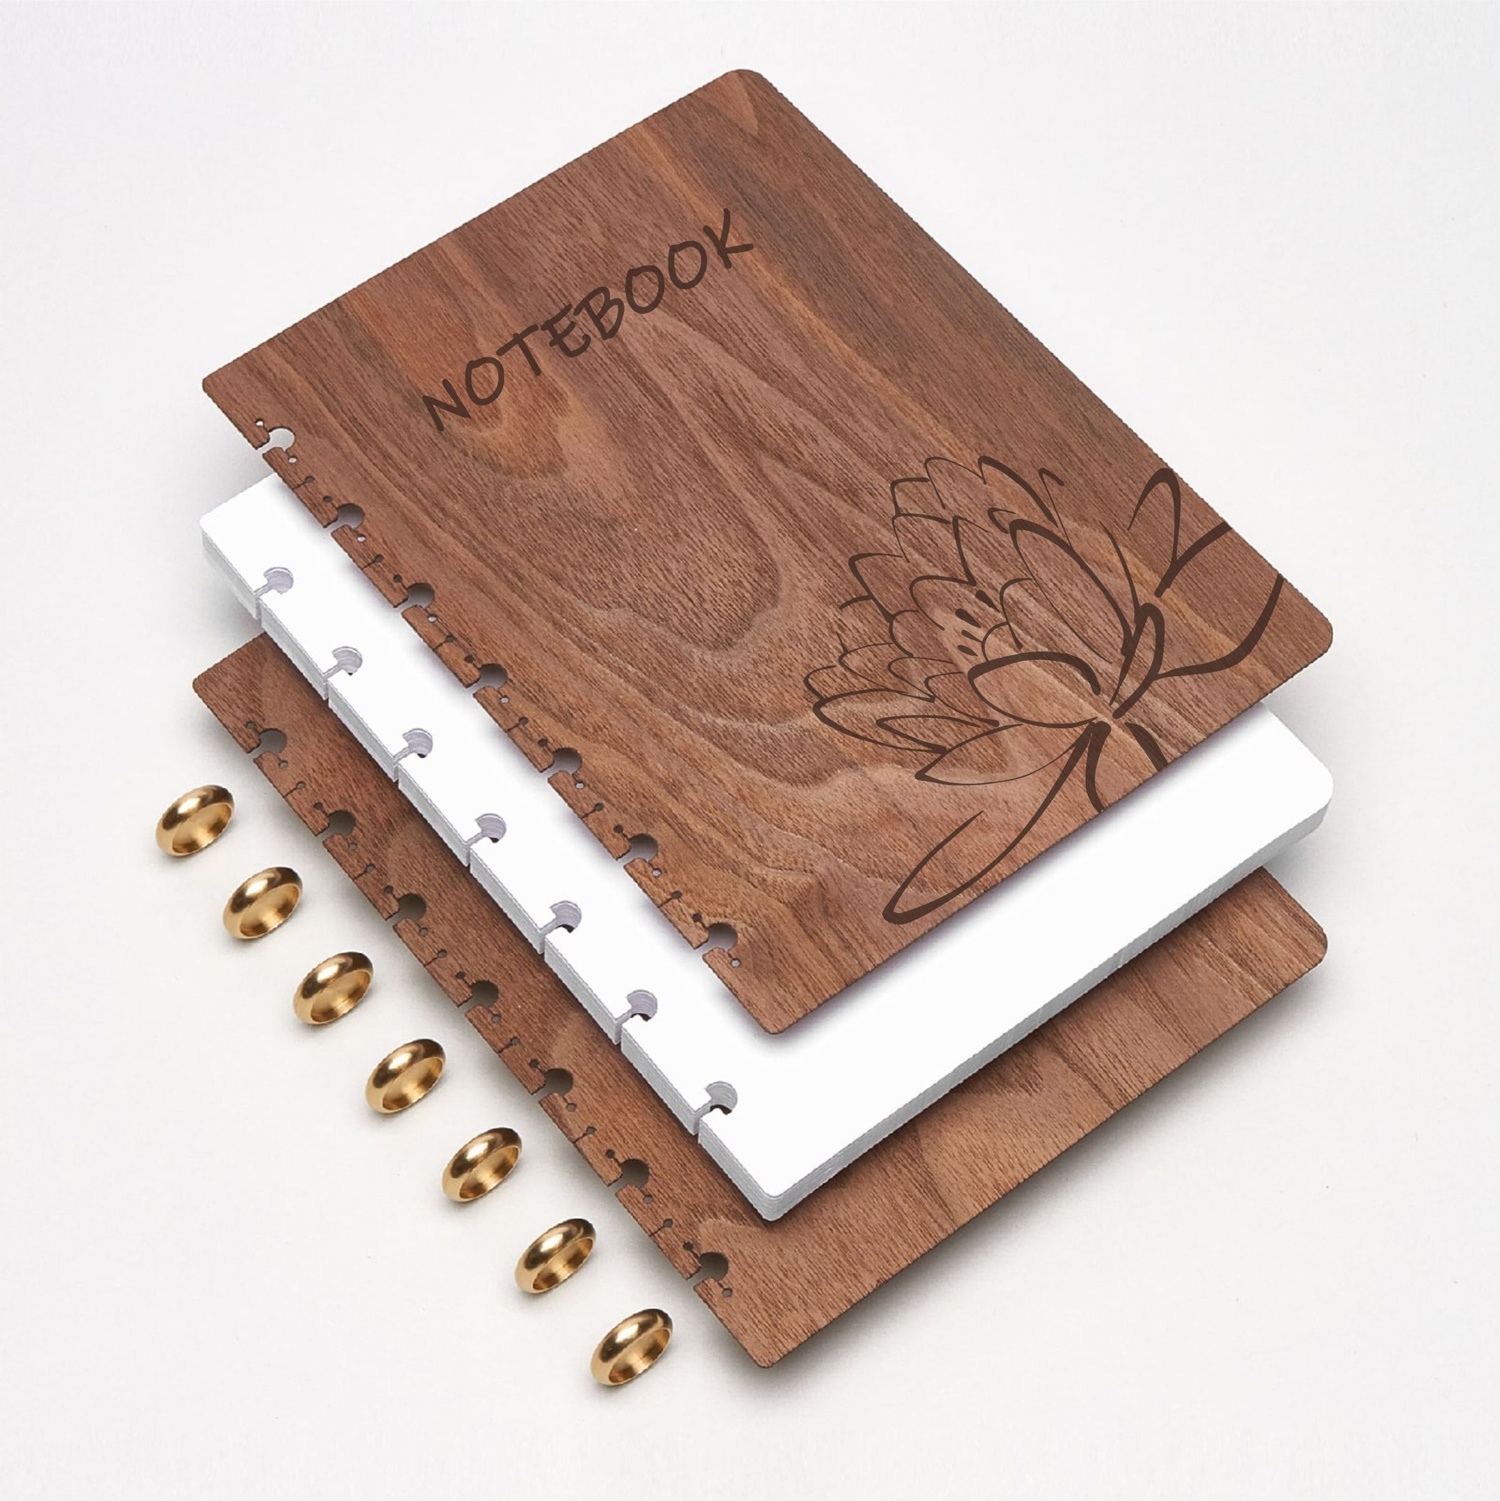 Notebook 'idea' Blank Sketch Notebook / Journal With a Laser Cut Cover 